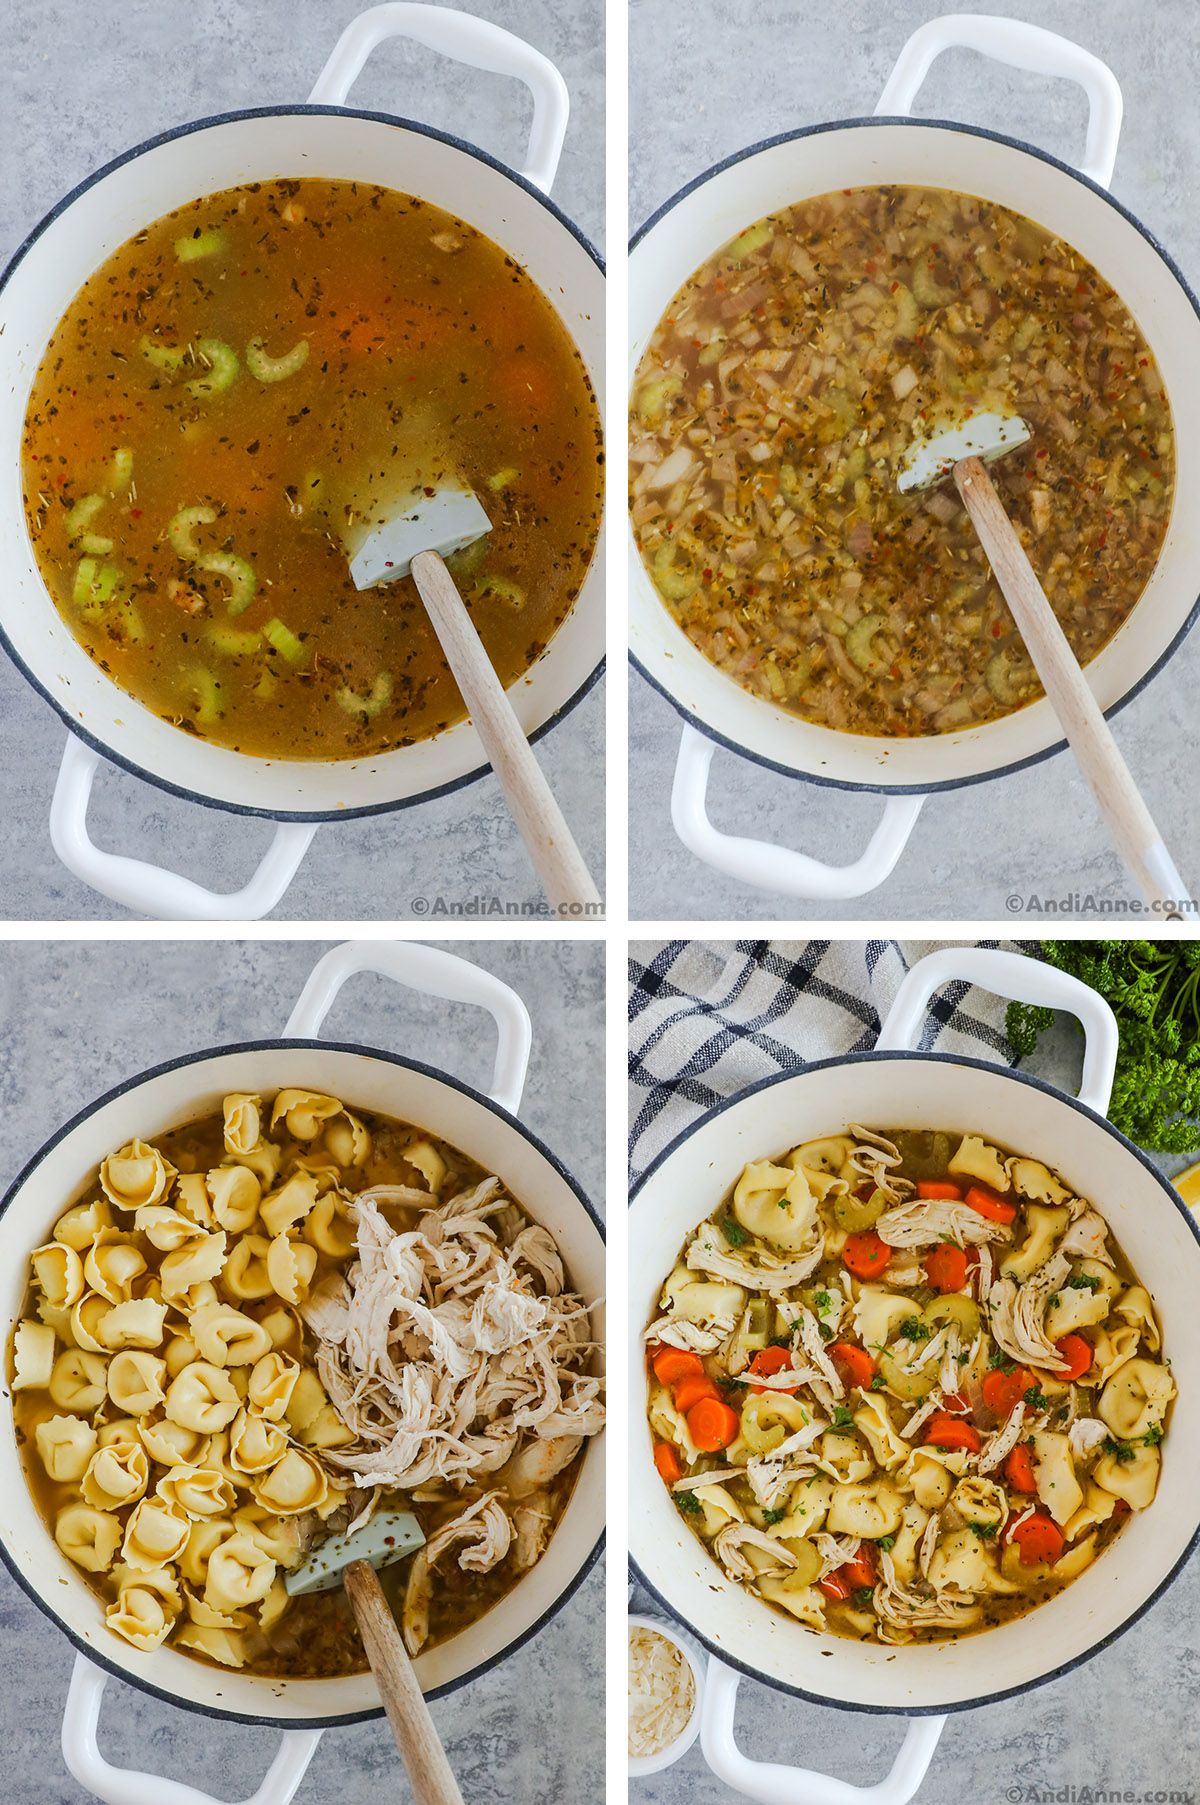 Four images grouped together. First is broth with vegetables and spices. Second is cooked chopped onion, celery and spices in broth. Third is uncooked rotini pasta and shredded chicken. Fourth is cooked chicken tortilla soup